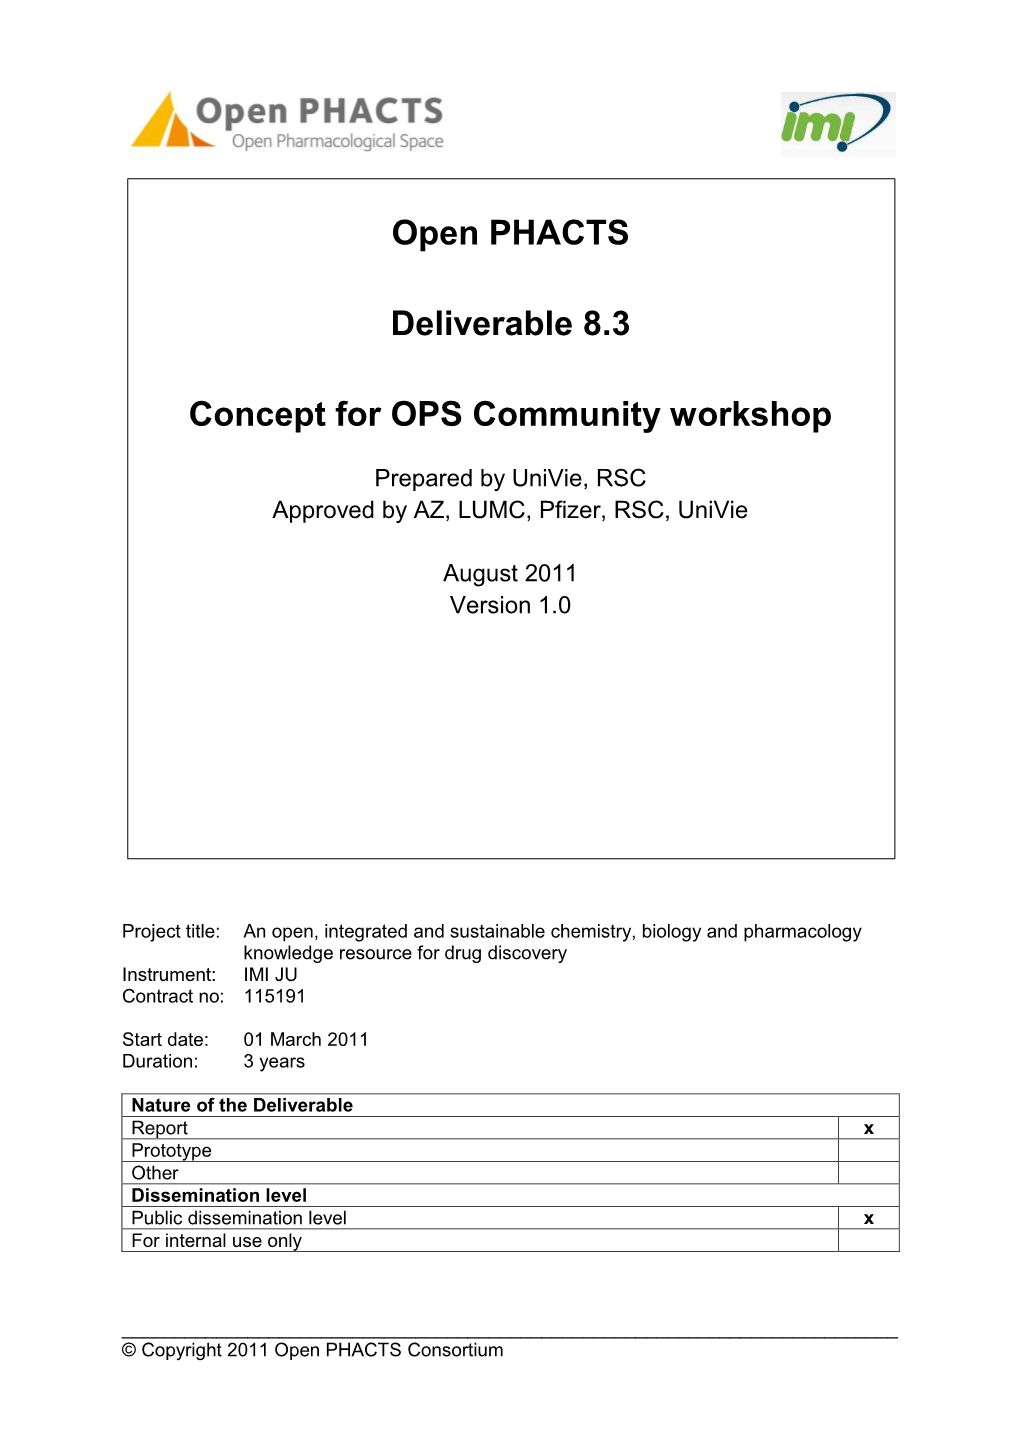 Open PHACTS Deliverable 8.3 Concept for OPS Community Workshop